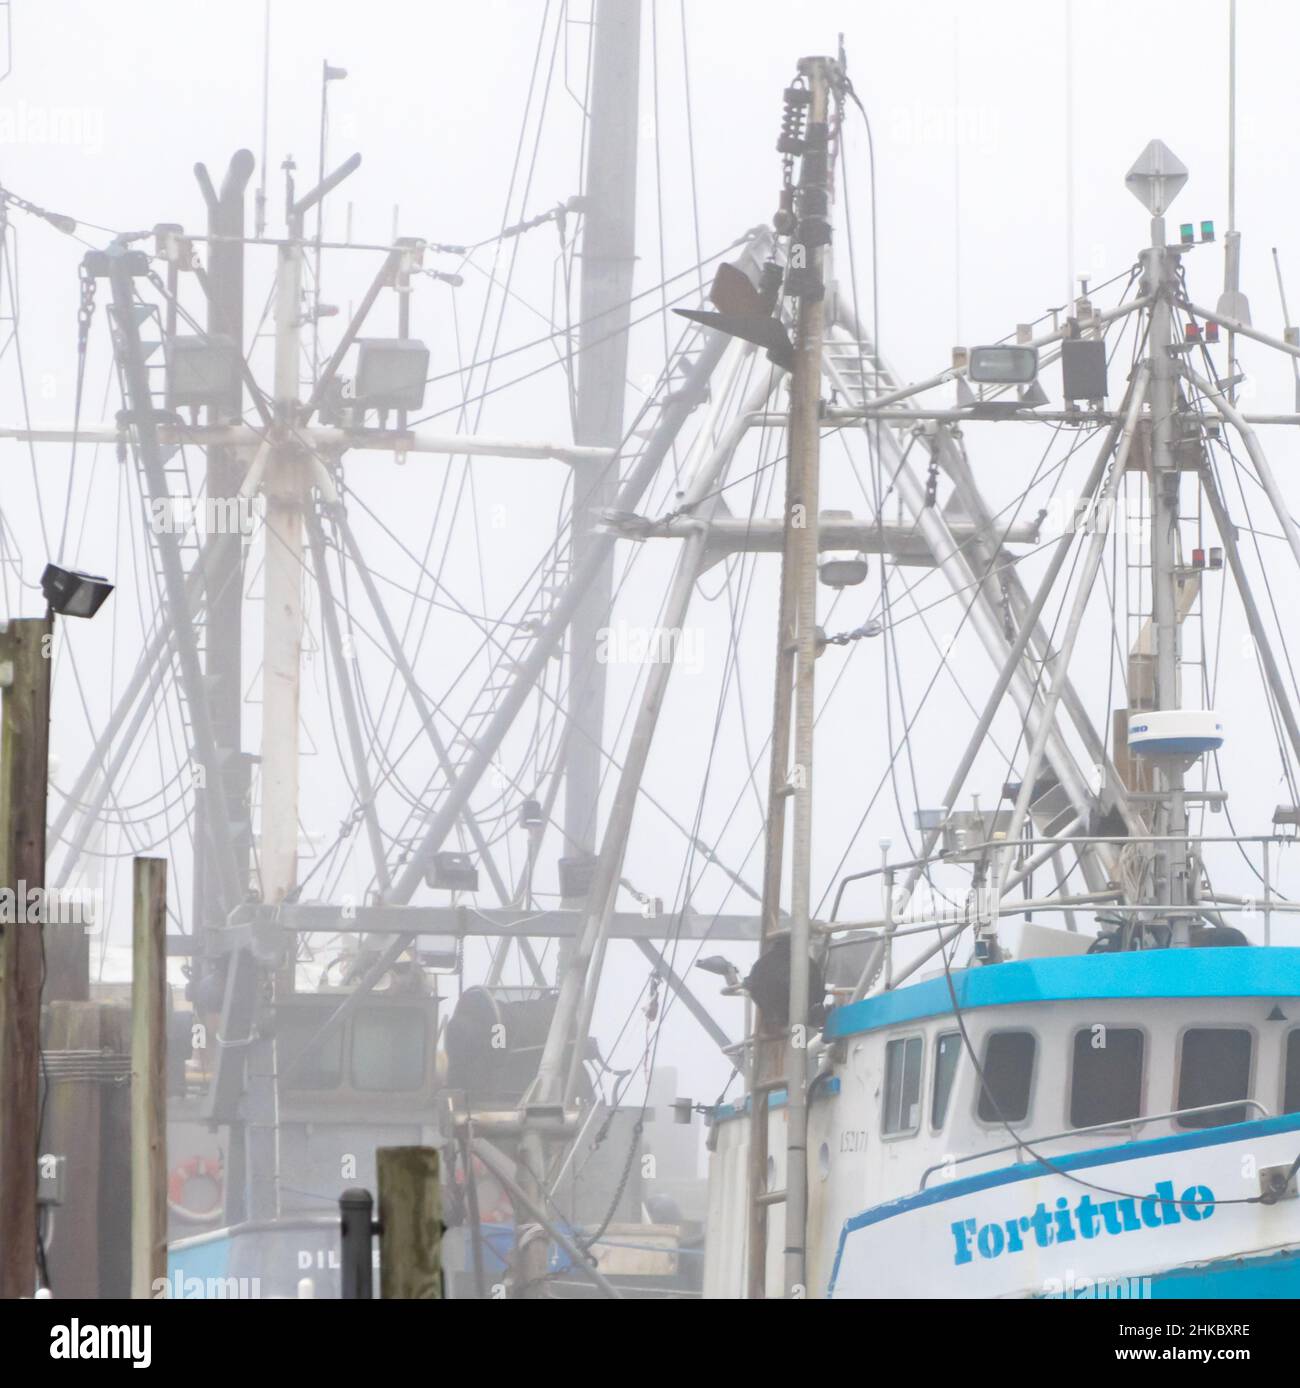 Commercial fishing boat, Fortitude at a dock in Greenport, NY Stock Photo